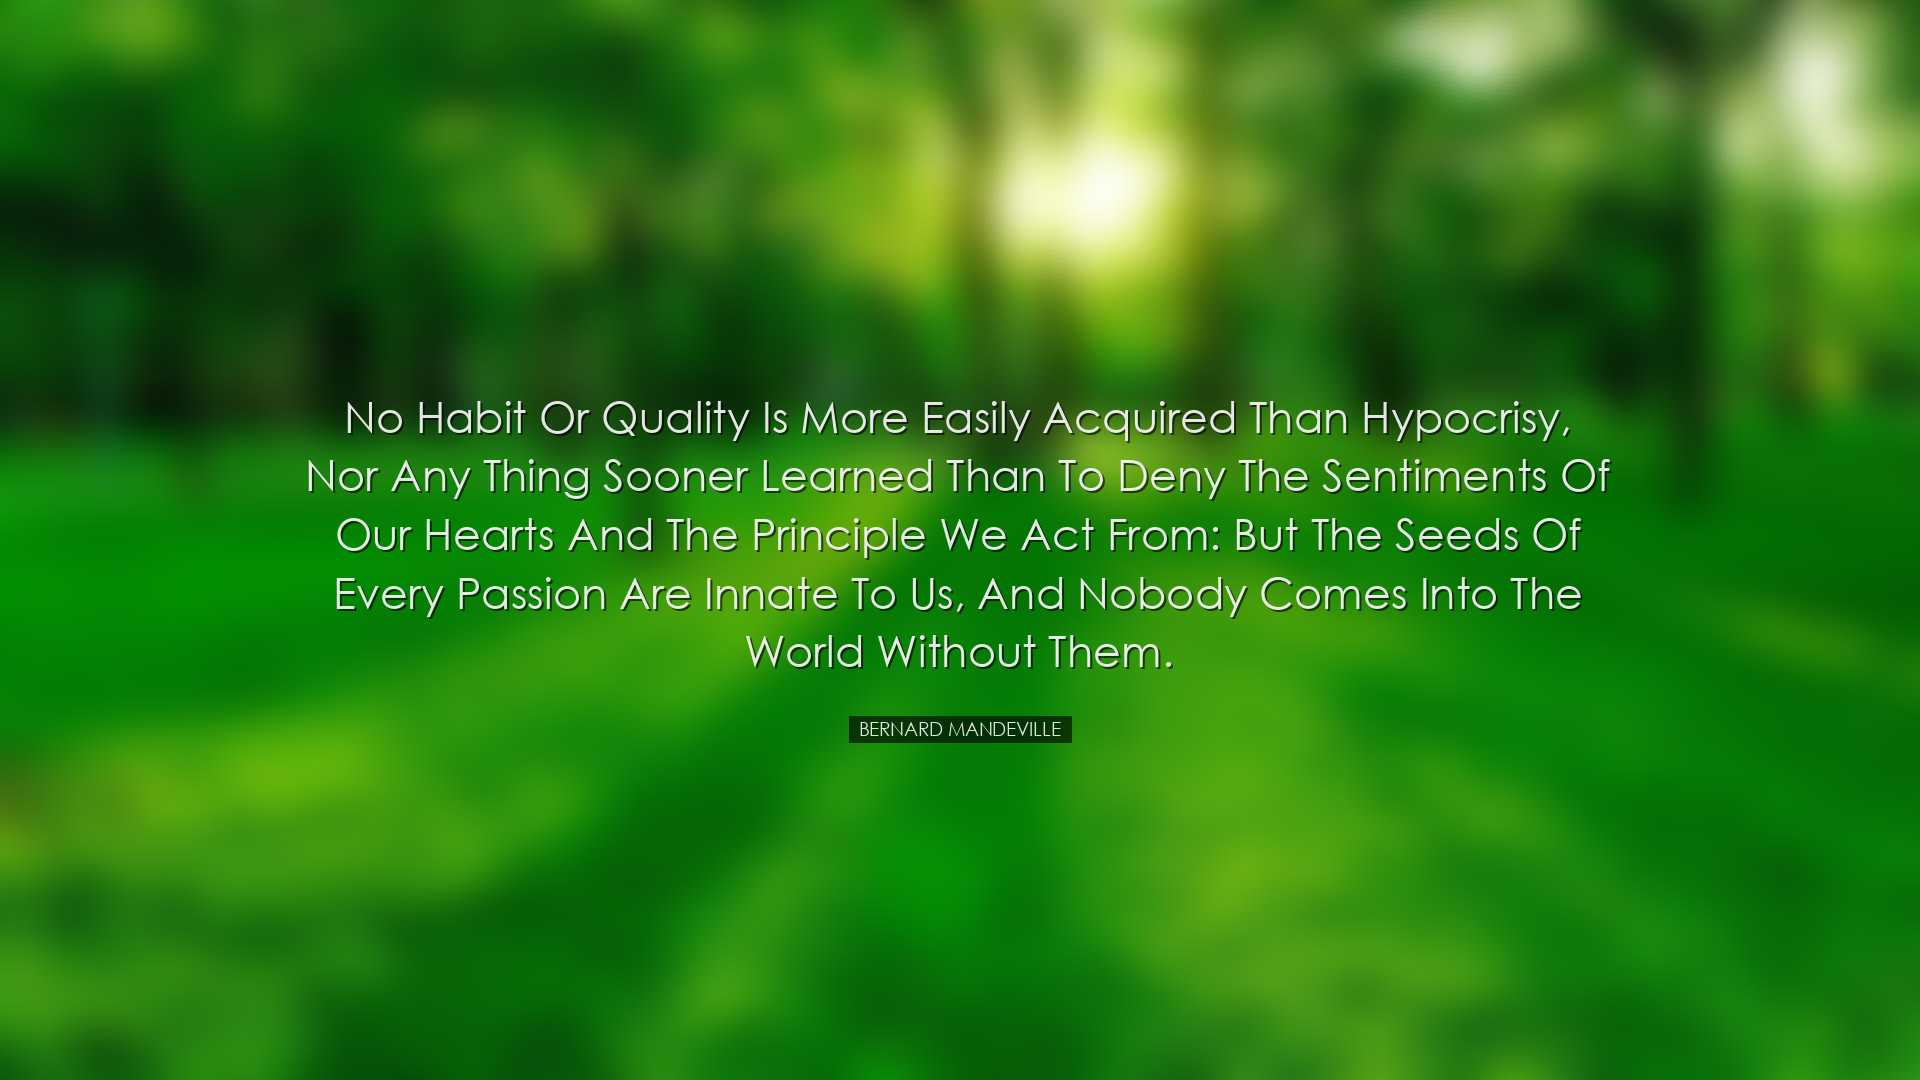 No habit or quality is more easily acquired than hypocrisy, nor an